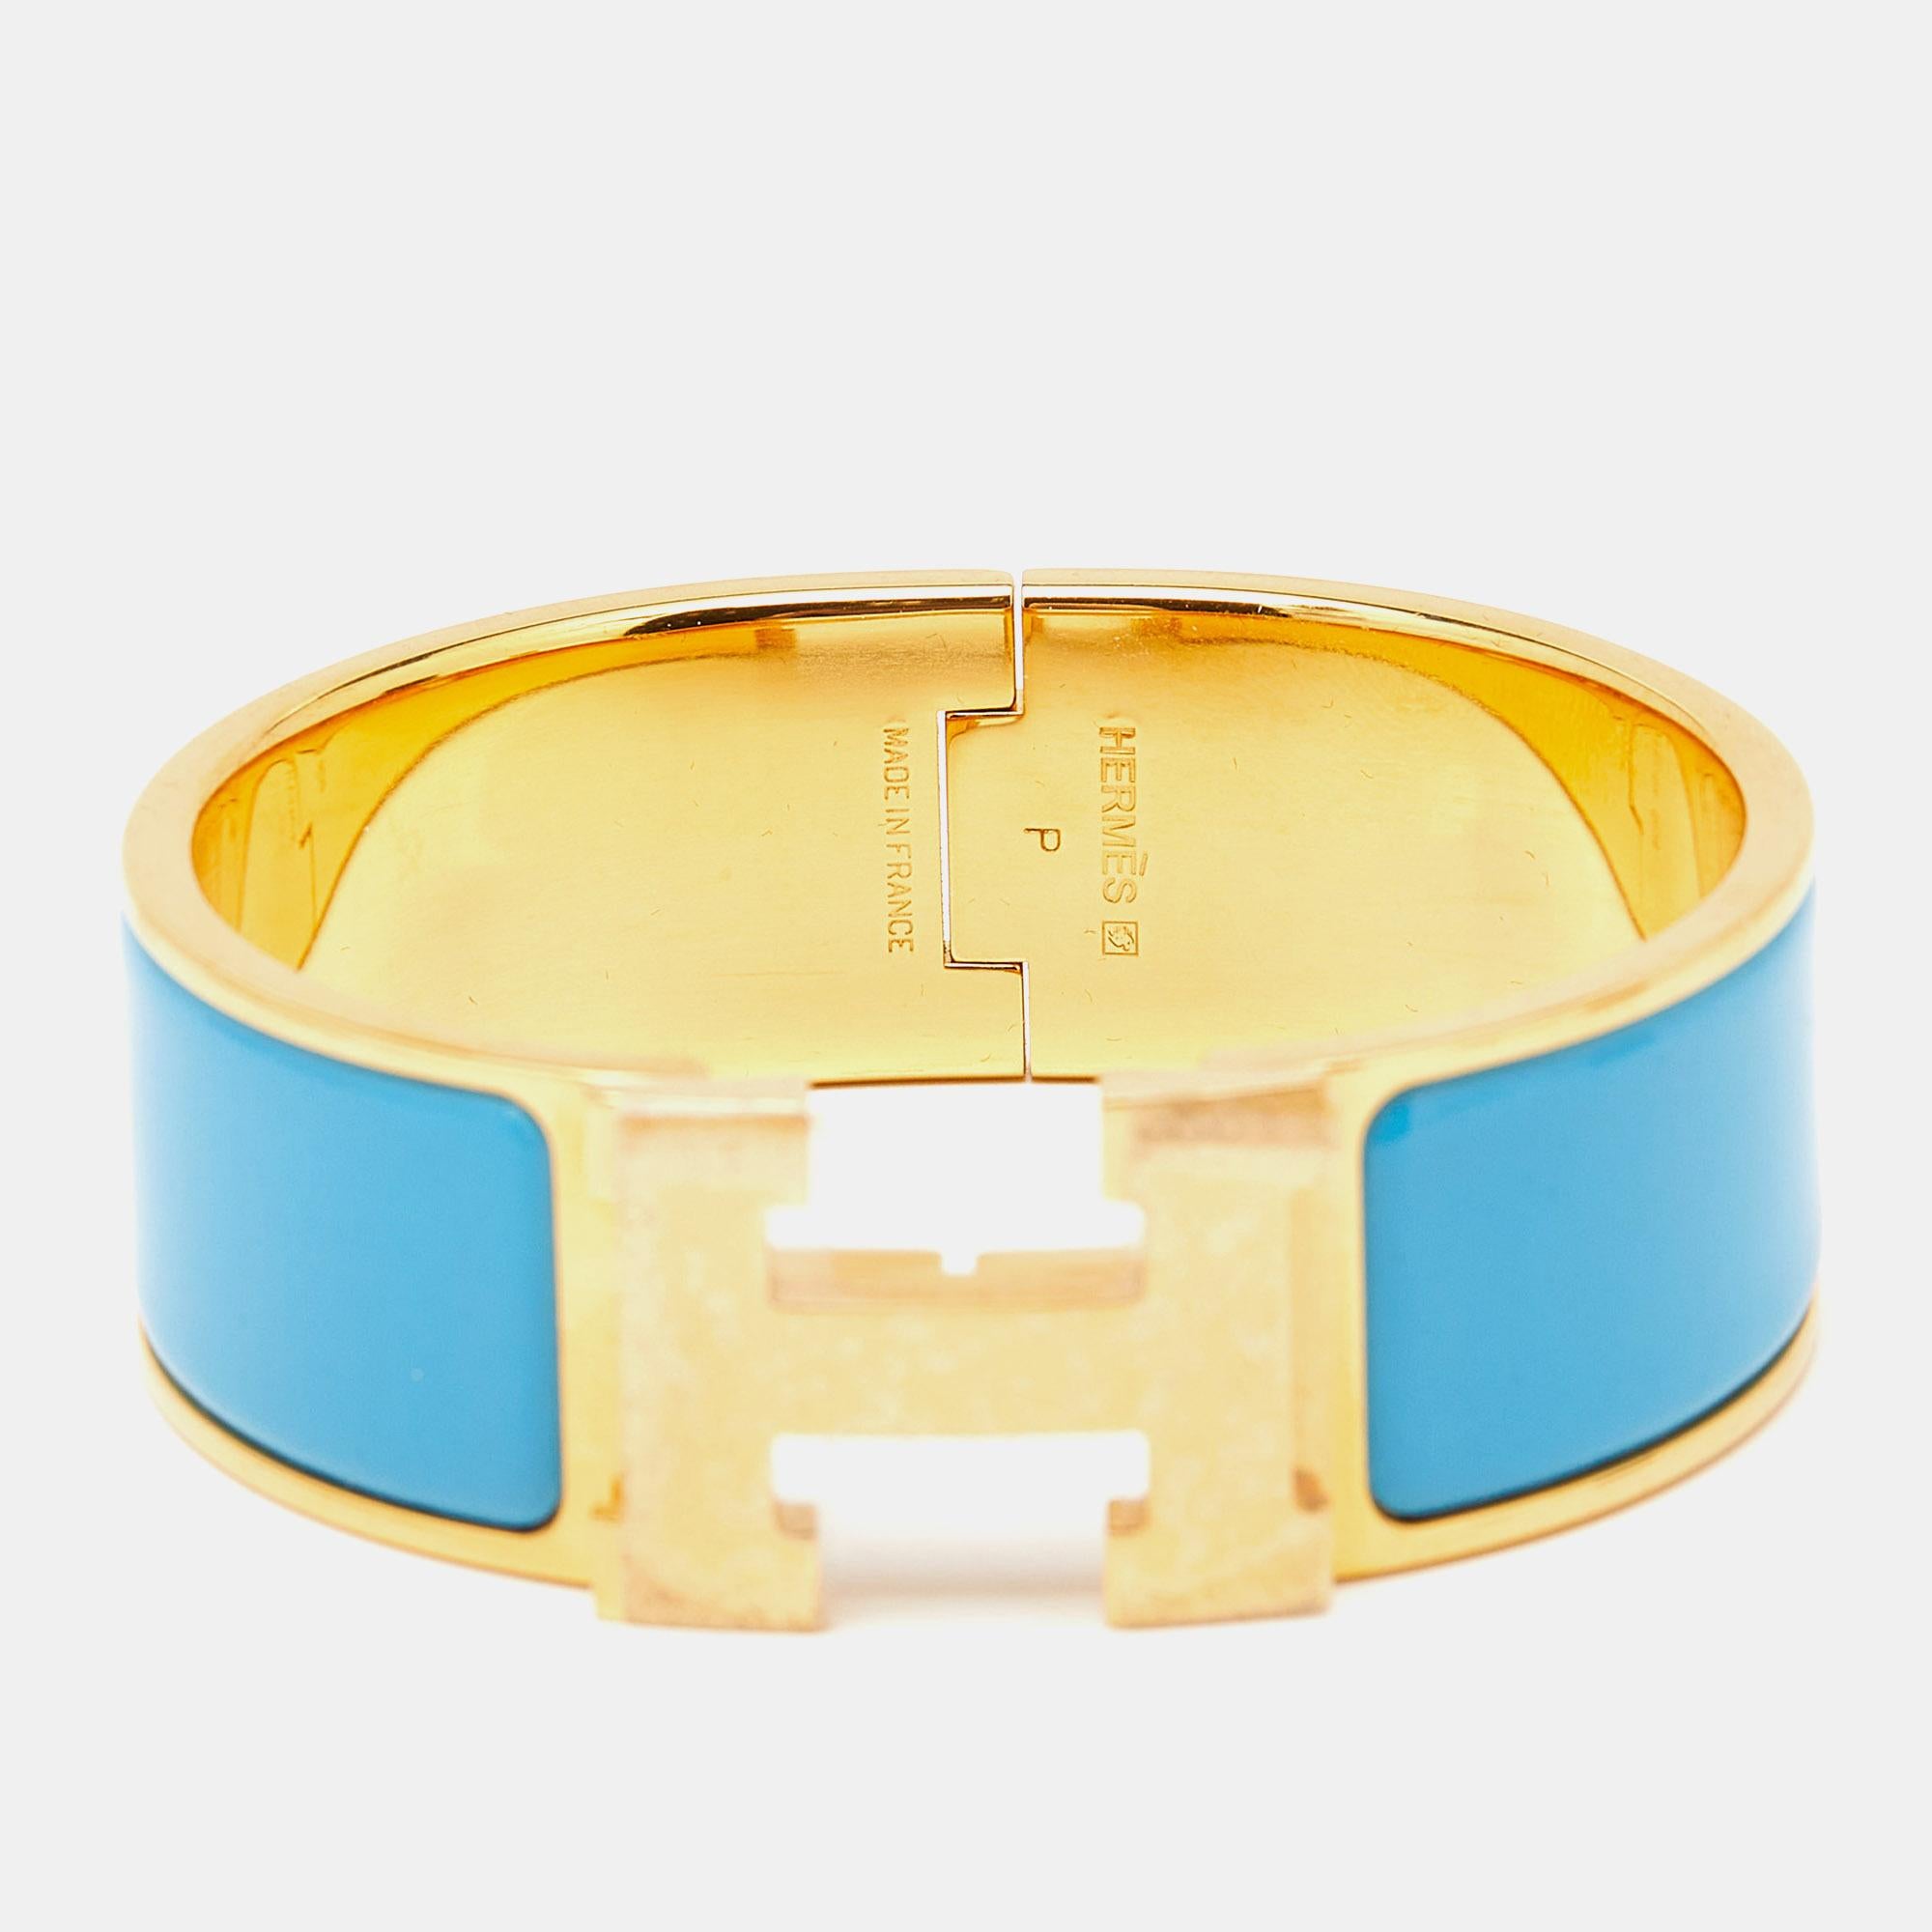 The Hermès Clic Clac H bracelet is an exquisite piece of jewelry. It features a glossy blue enamel band with a prominent gold-plated H-shaped clasp, creating a striking contrast. This luxurious and elegant accessory embodies timeless style and